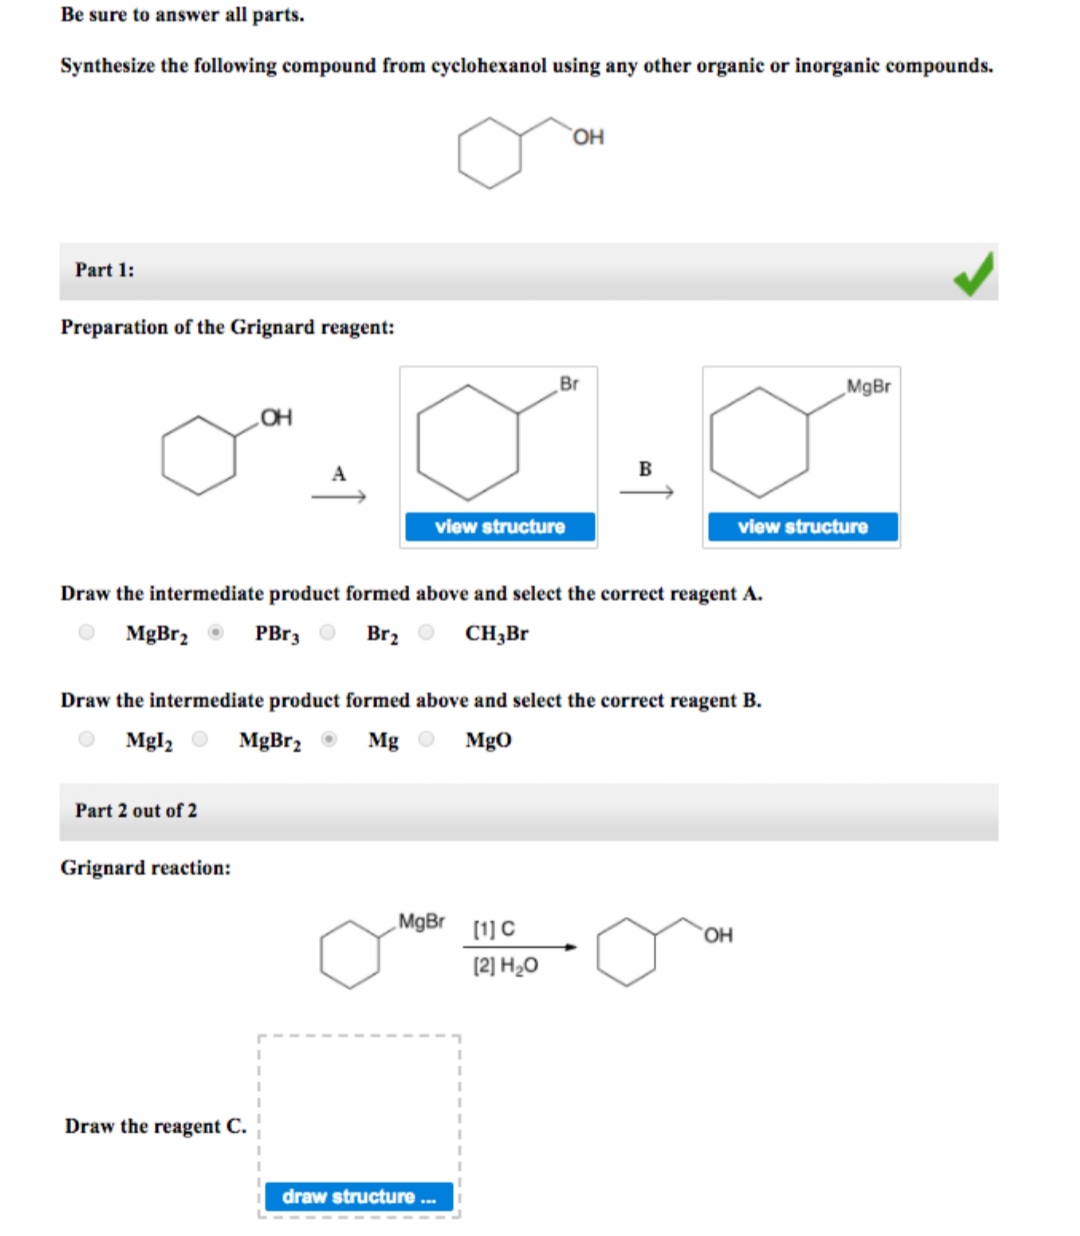 Be sure to answer all parts.
Synthesize the following compound from cyclohexanol using any other organic or inorganic compounds.
Part 1:
Preparation of the Grignard reagent:
Br
„MgBr
B
view structure
view structure
Draw the intermediate product formed above and select the correct reagent A.
MgBr, O
PBr3 O
Brz O CH,Br
Draw the intermediate product formed above and select the correct reagent B.
Mgl, O
MgBr2 O
Mg O
MgO
Part 2 out of 2
Grignard reaction:
MgBr [1] C
OH
(2] H20
Draw the reagent C.
draw structure .
